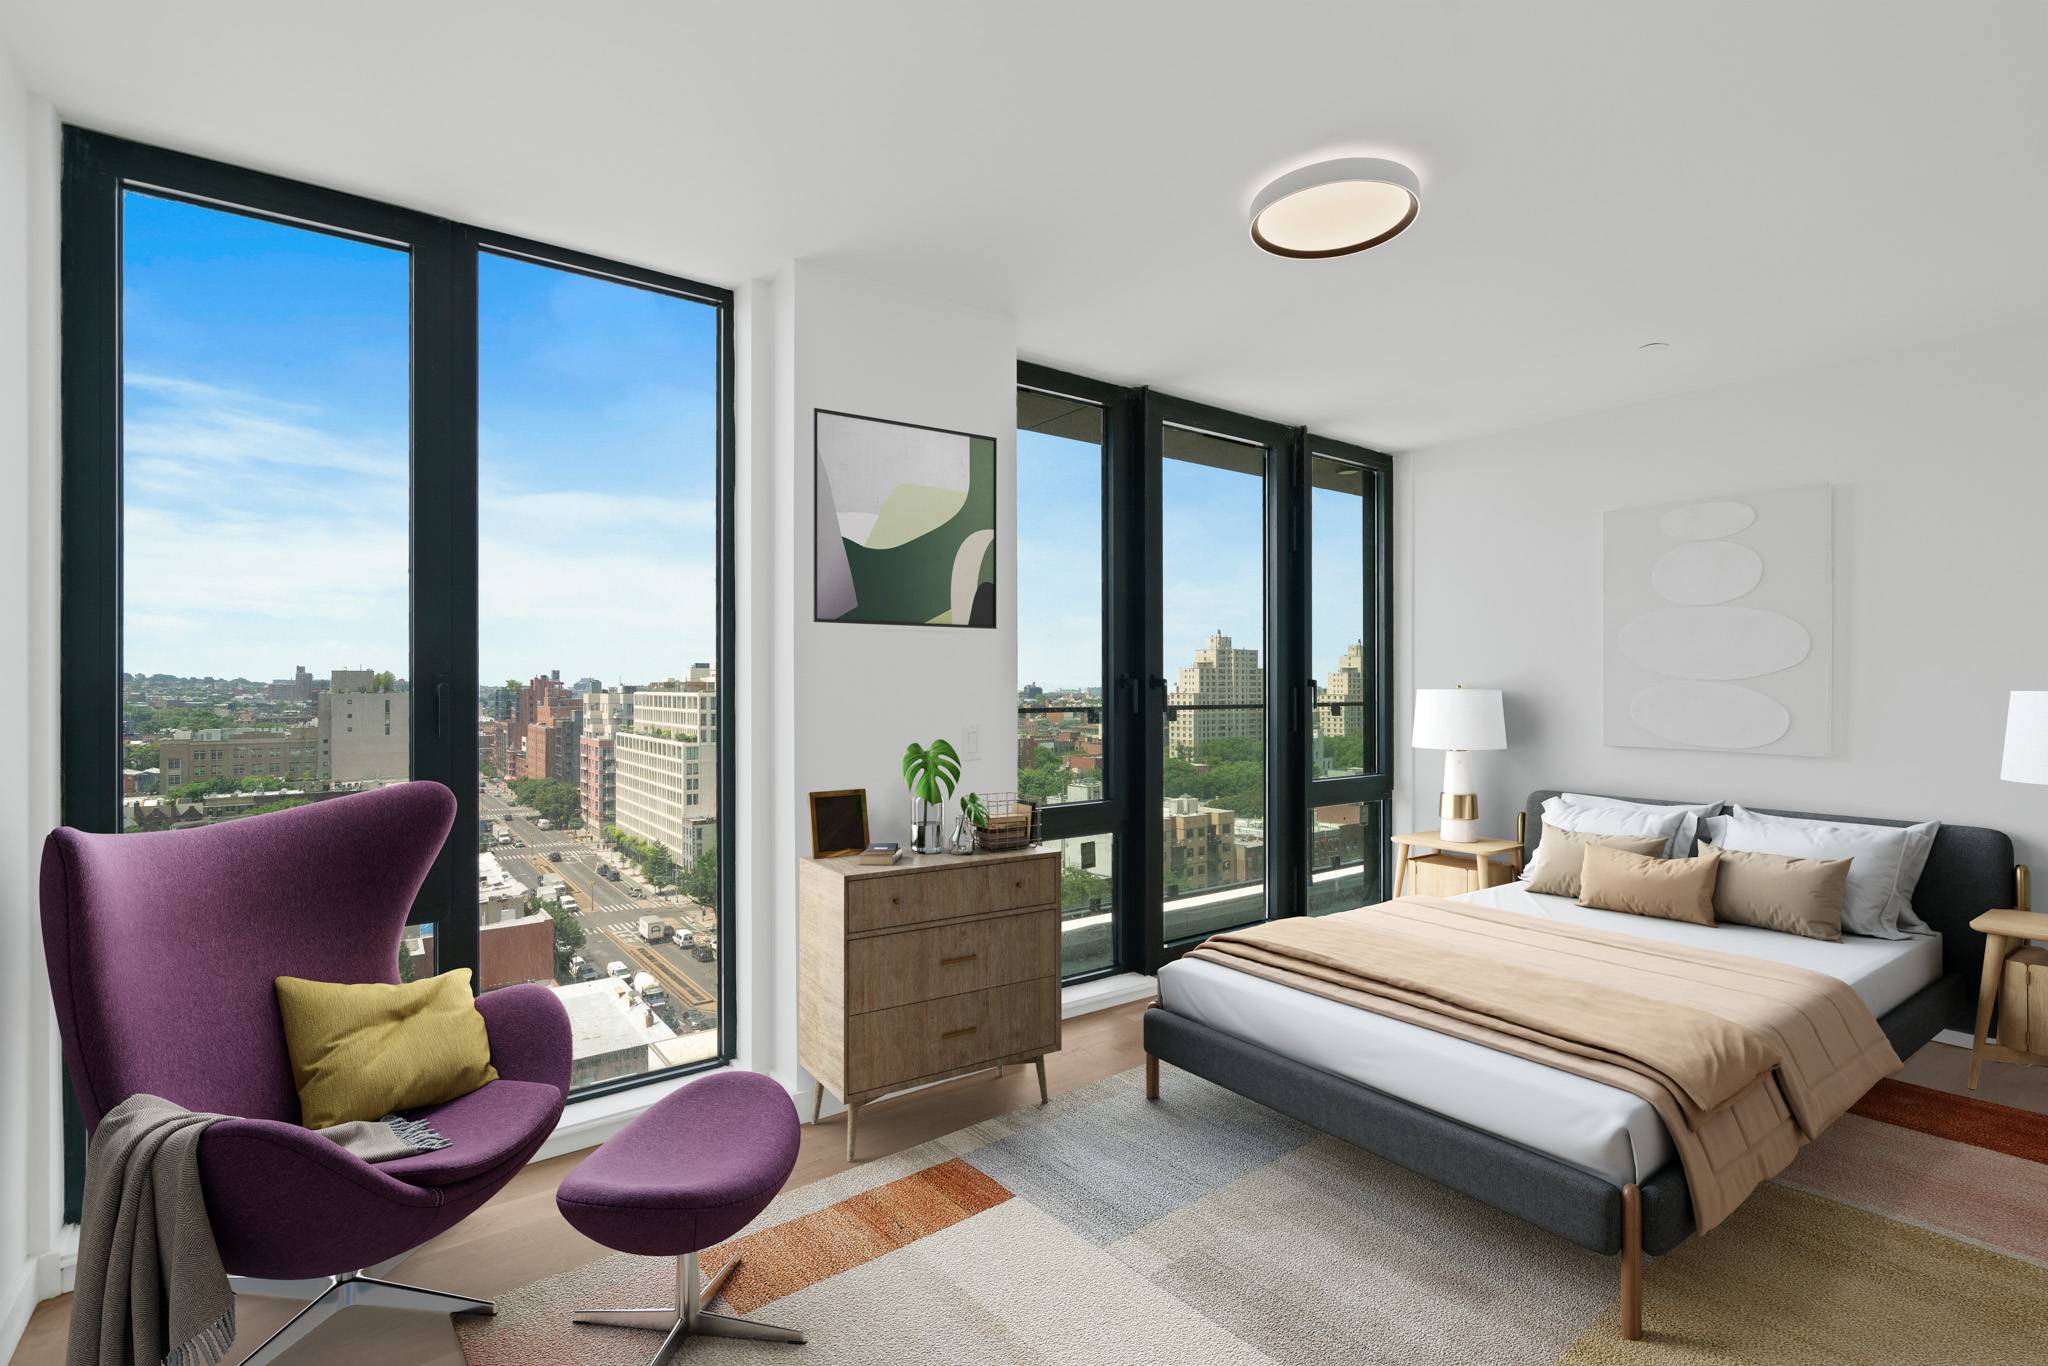 BRAND NEW, LUXURY CORNER 1 BEDROOM + HOME OFFICE WITH LOGGIA RENTAL AT SIGNUM- 375 DEAN ST, BOERUM HILL, BROOKLYN